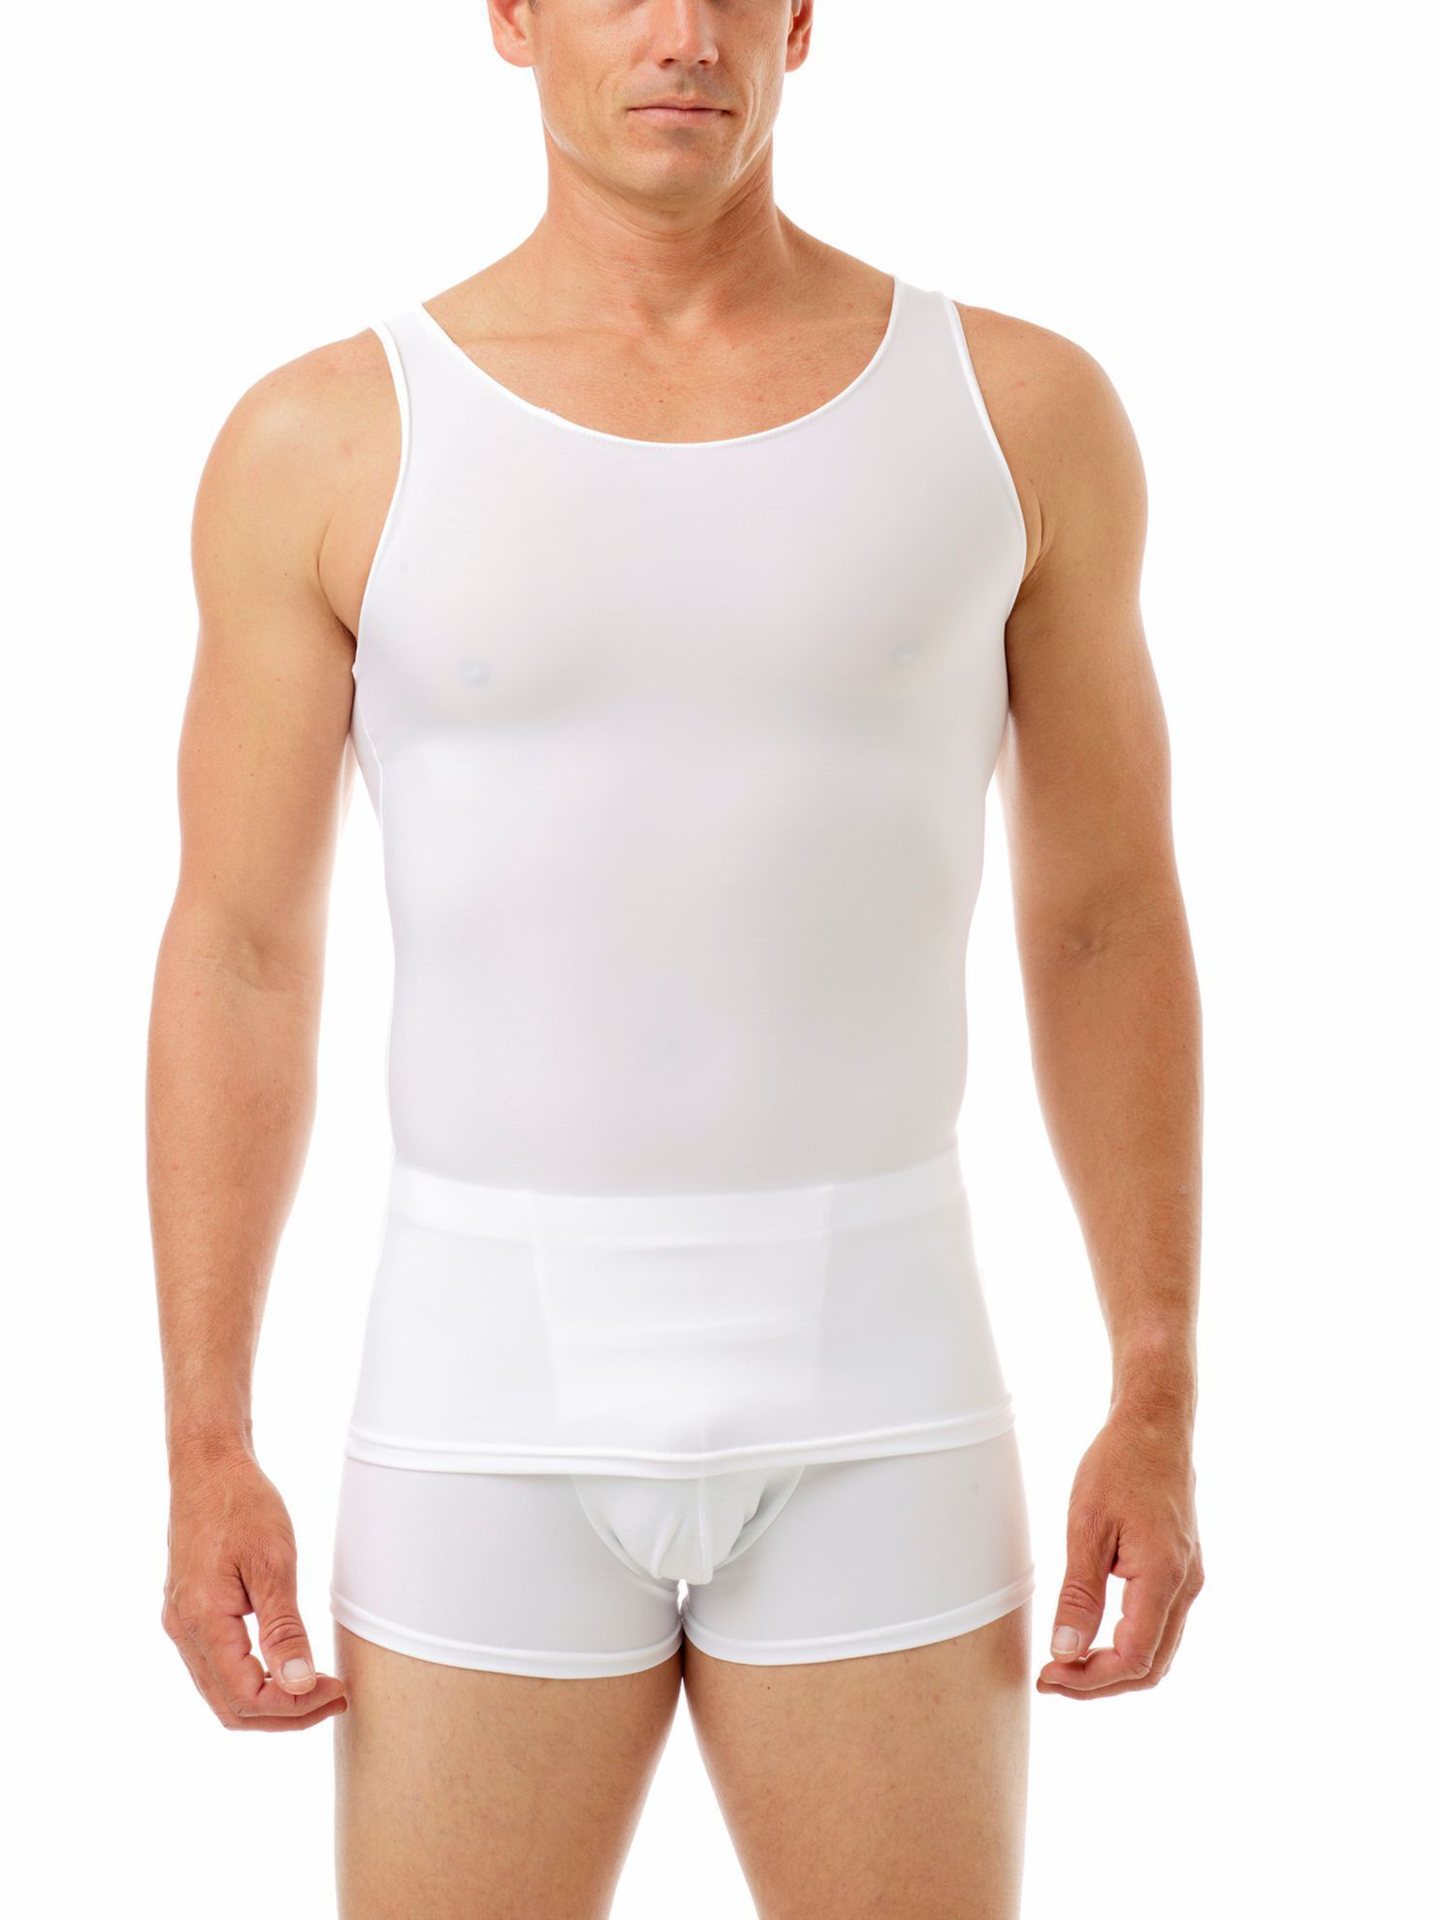 Compression T Shirt soothes Underarms, Upper Chest, Abdomen and